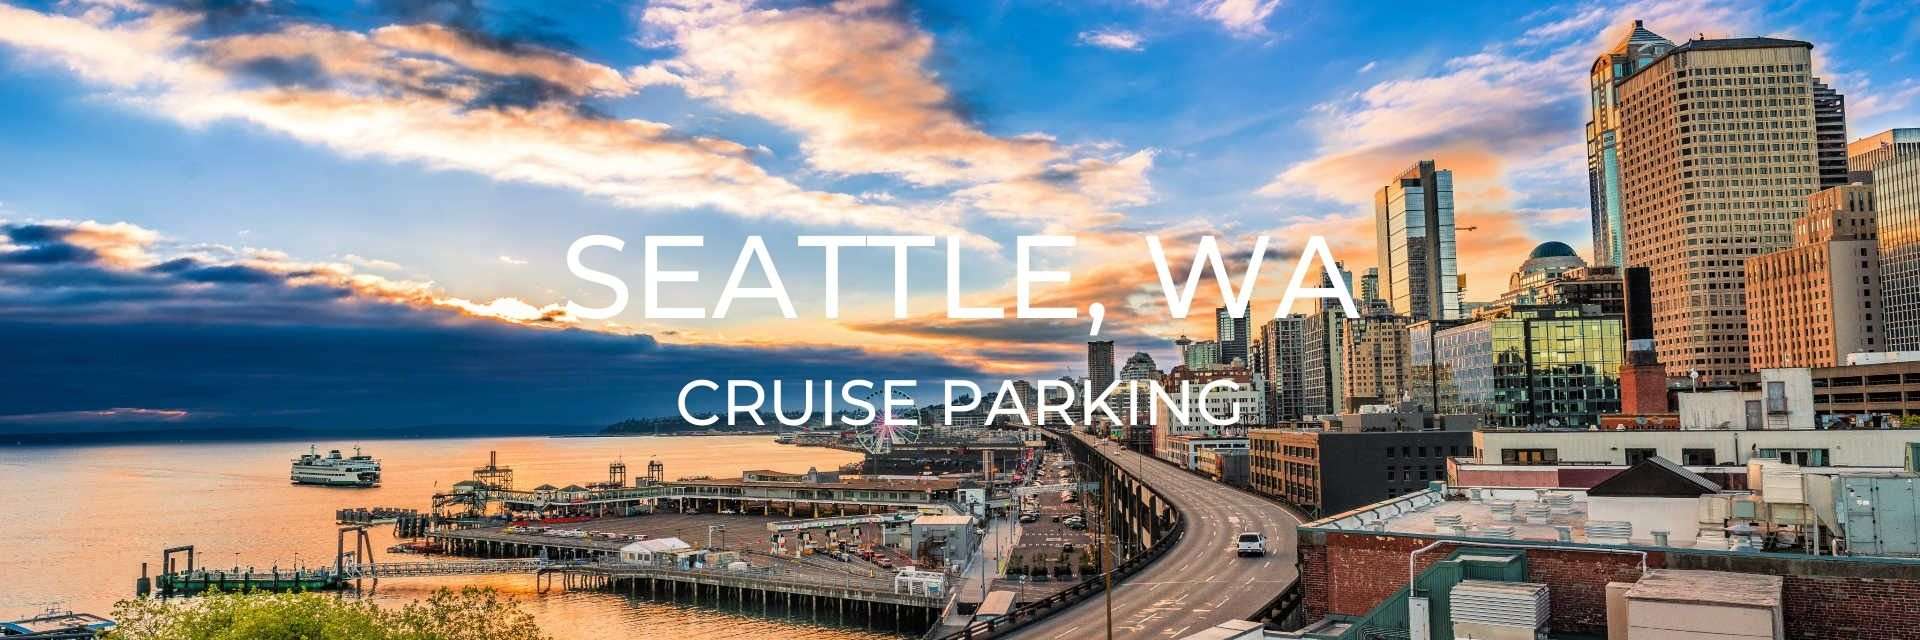 Seattle Cruise Parking Options